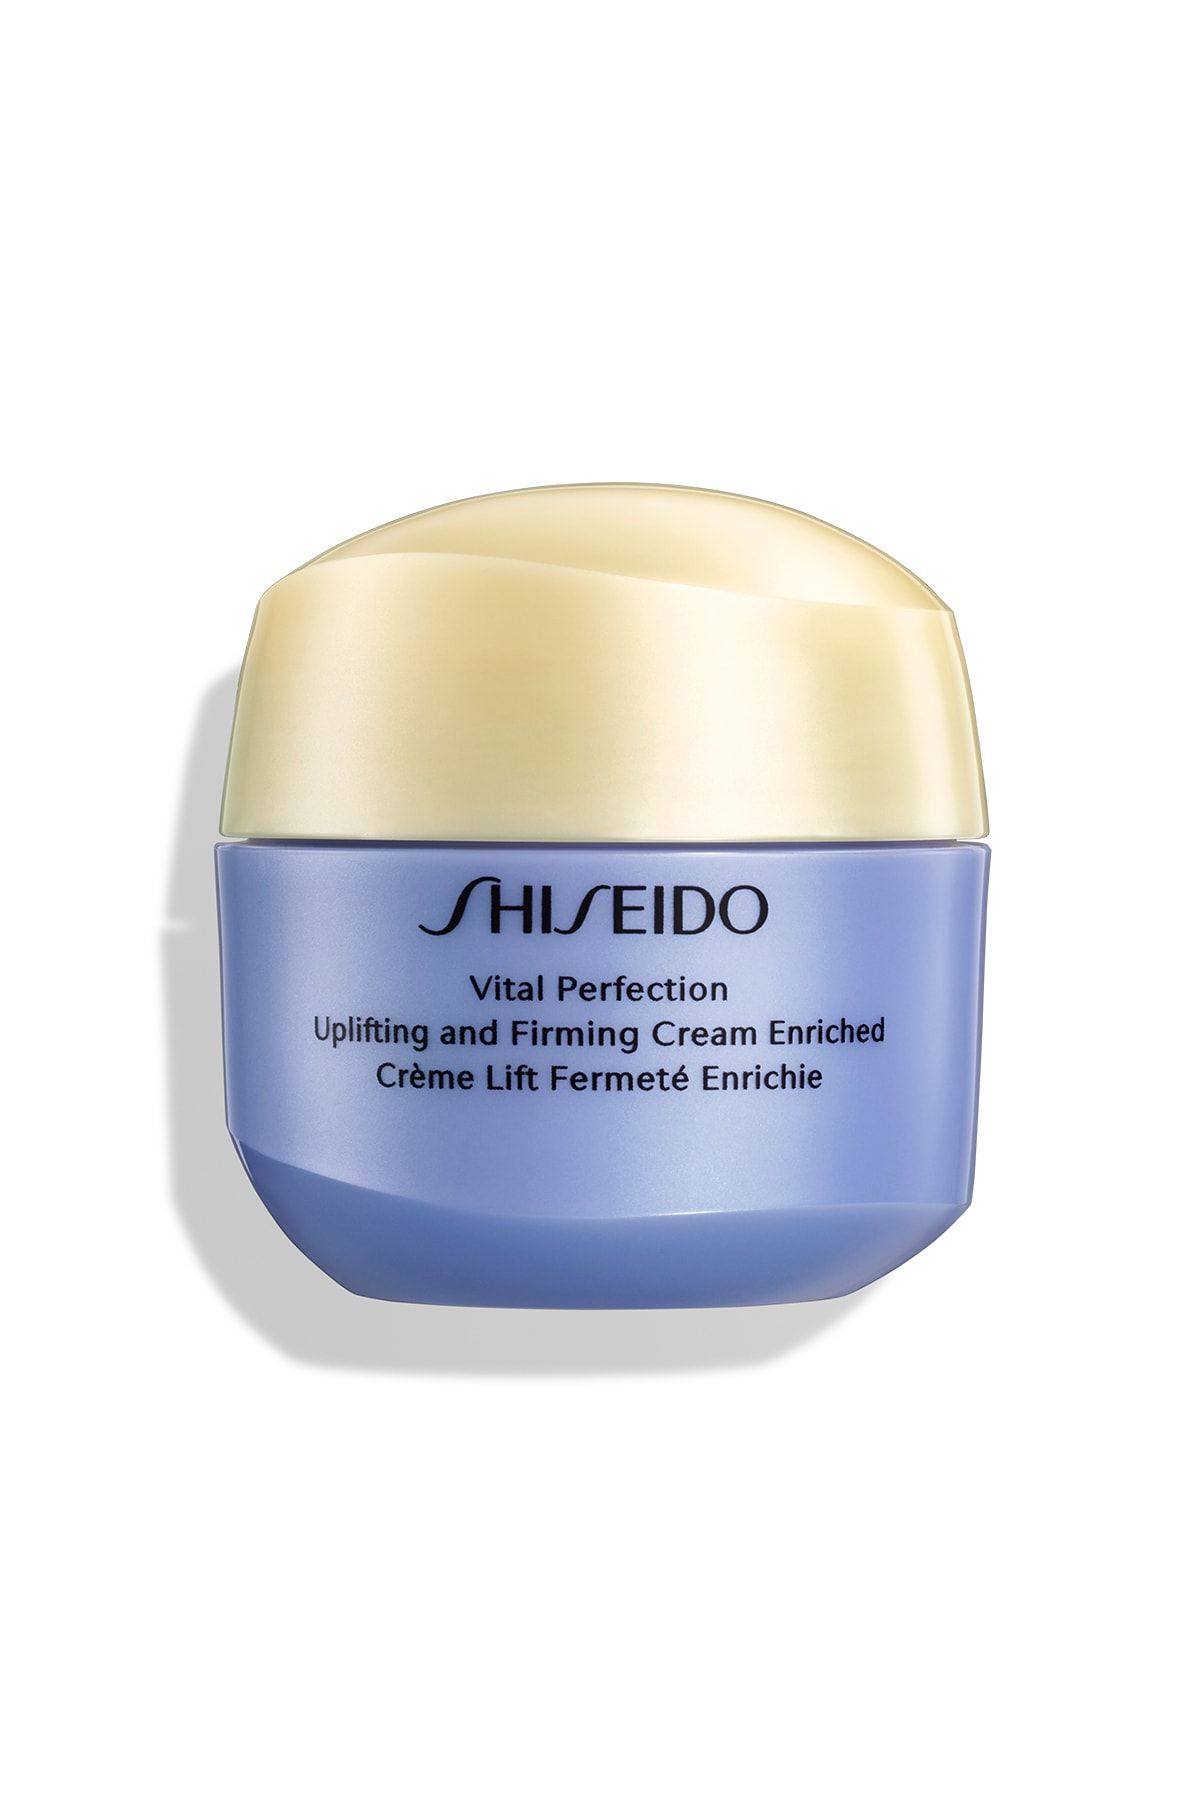 Shiseido Vpn Uplifting And Firming Cream Enriched 20 ml